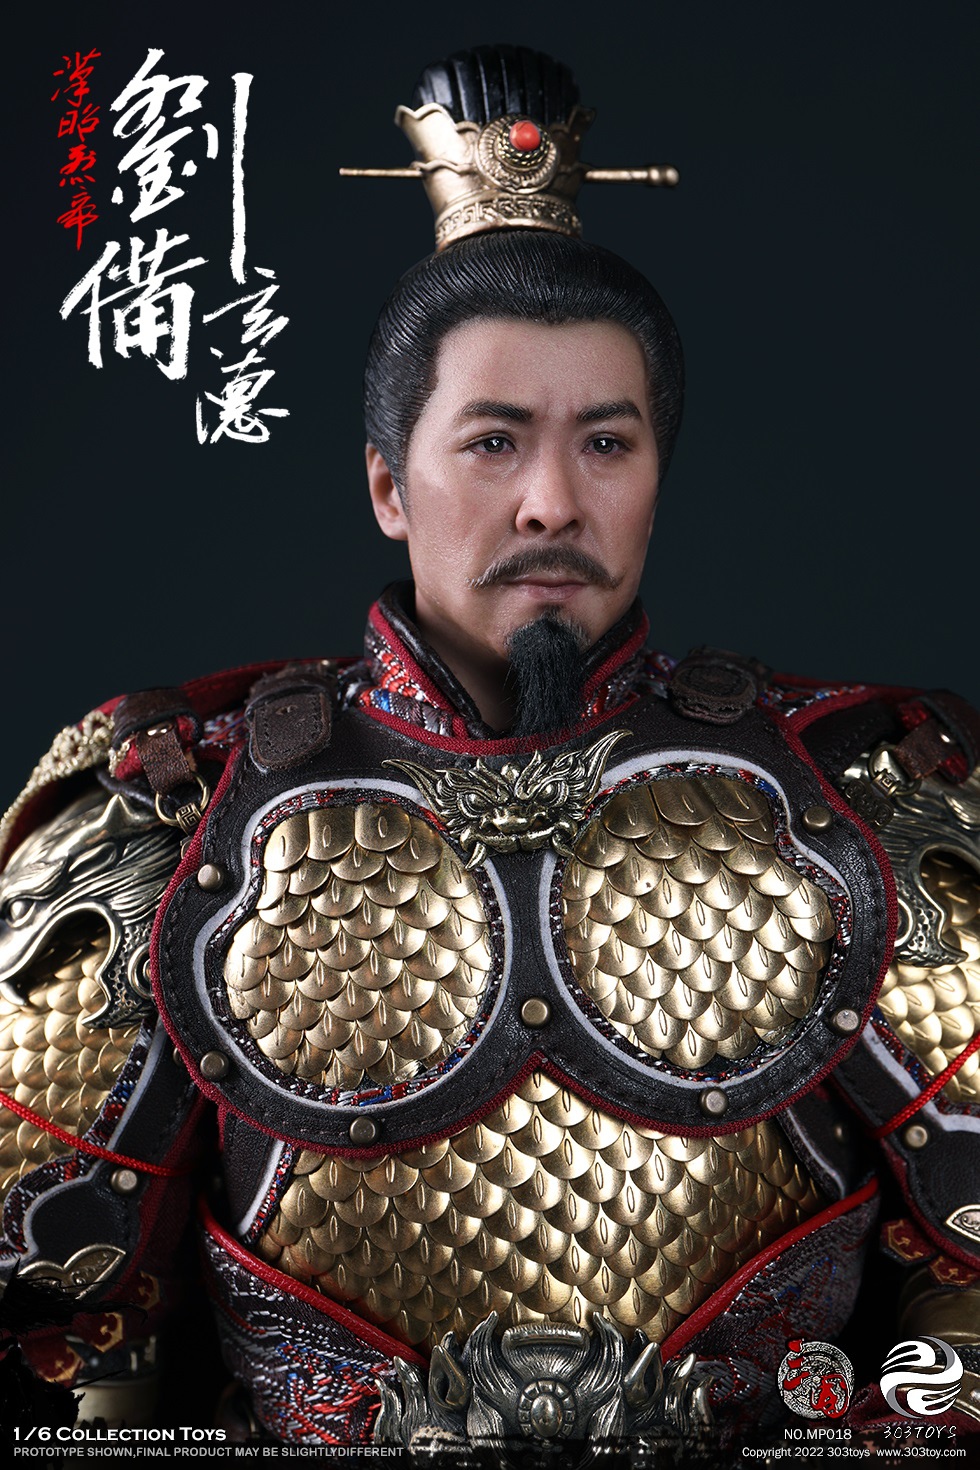 historical - NEW PRODUCT: 303Toys: 1/6 Three Kingdoms Series-Liu Bei Xuande Pure Copper Standard Edition/Deluxe Edition, Lu Zhanma #MP018/MP019/MP020 22450110